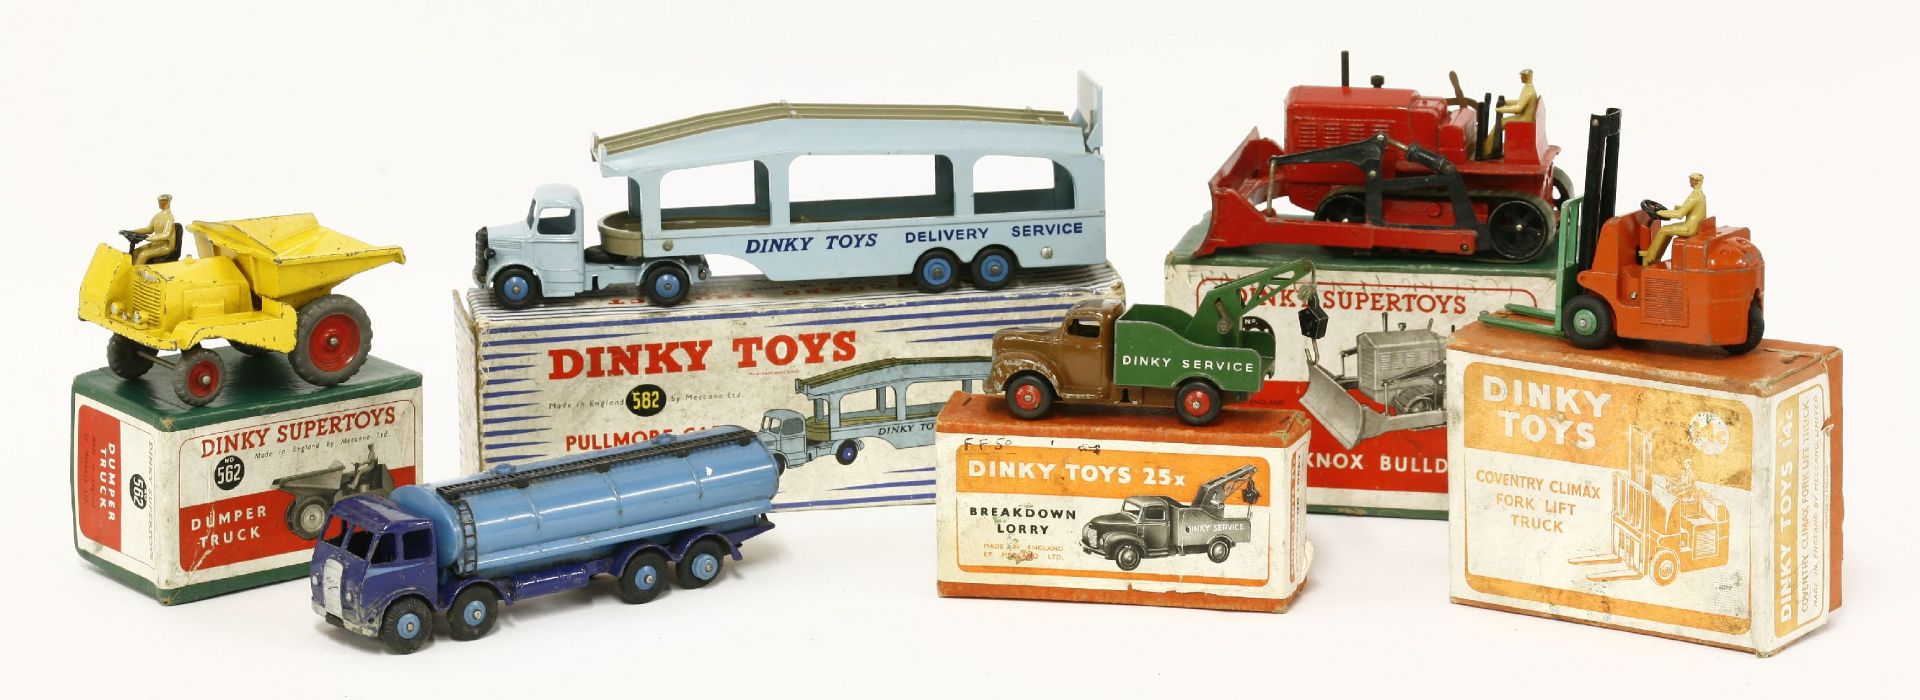 Dinky Toys, a breakdown lorry 25x, in an orange box, a Coventry Climax fork lift truck, orange